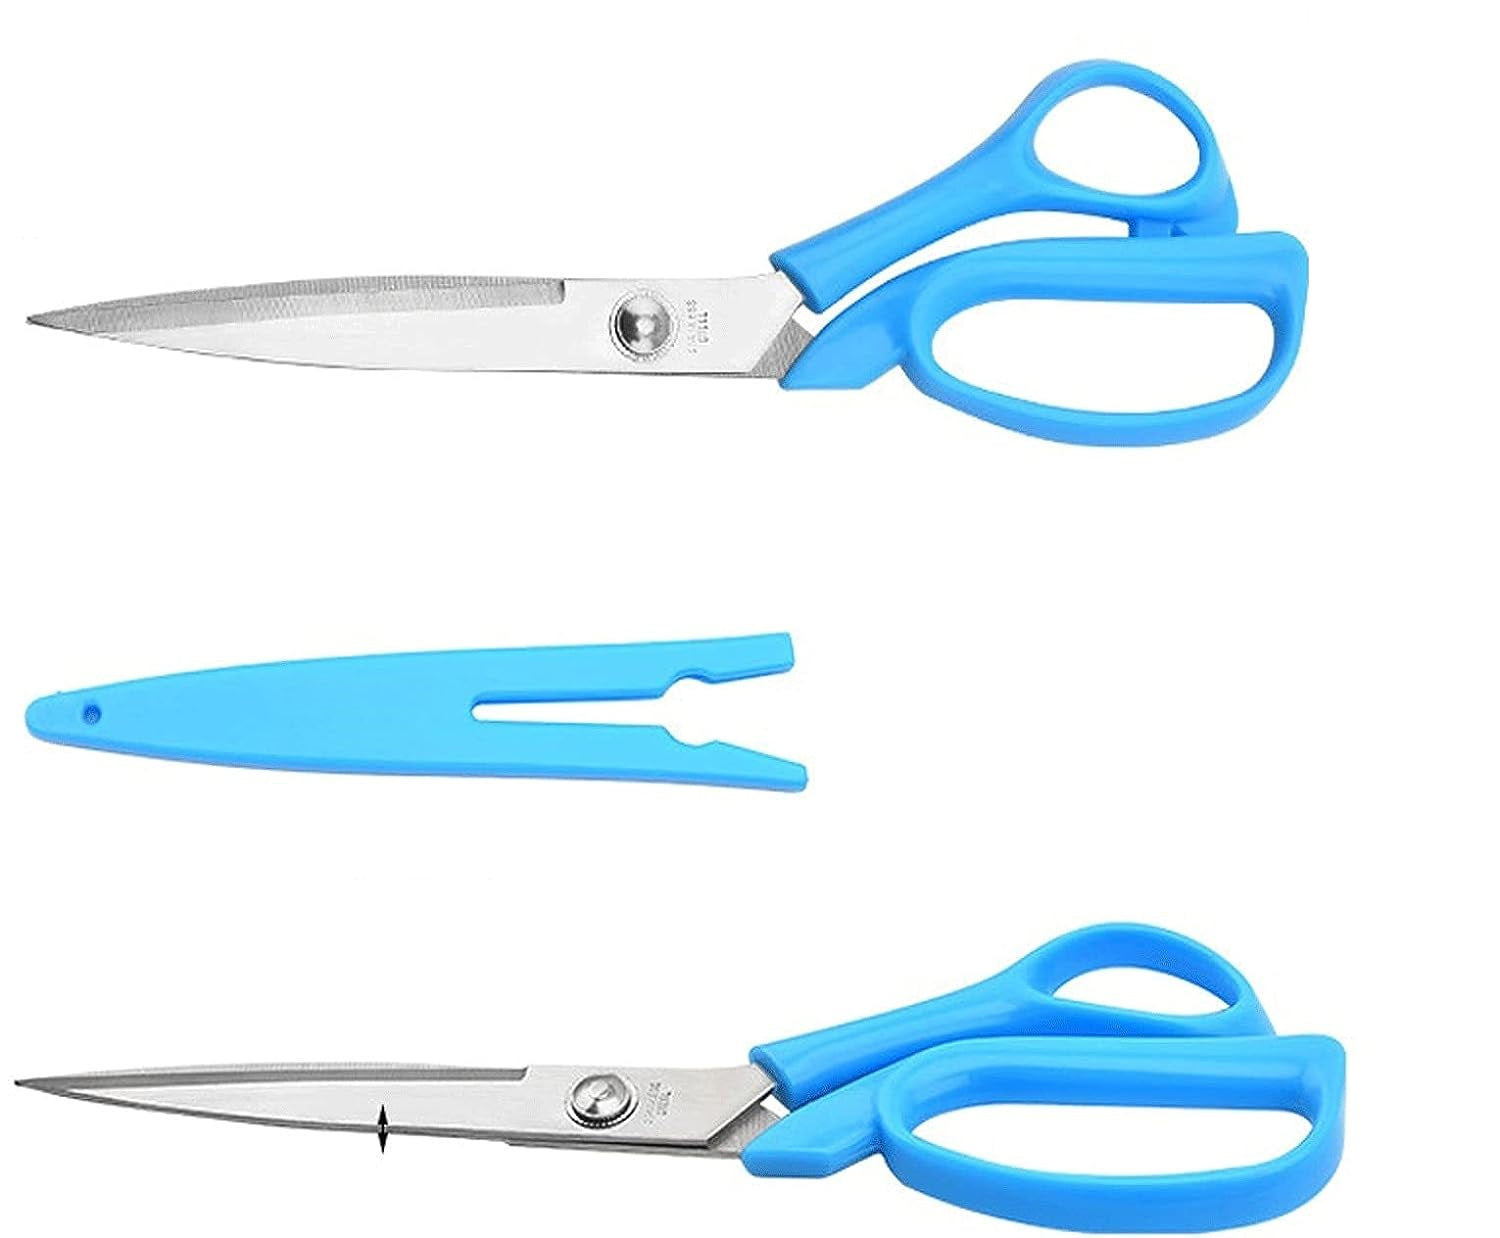 Kitchen Scissors With Protective Cover, Multi Functions